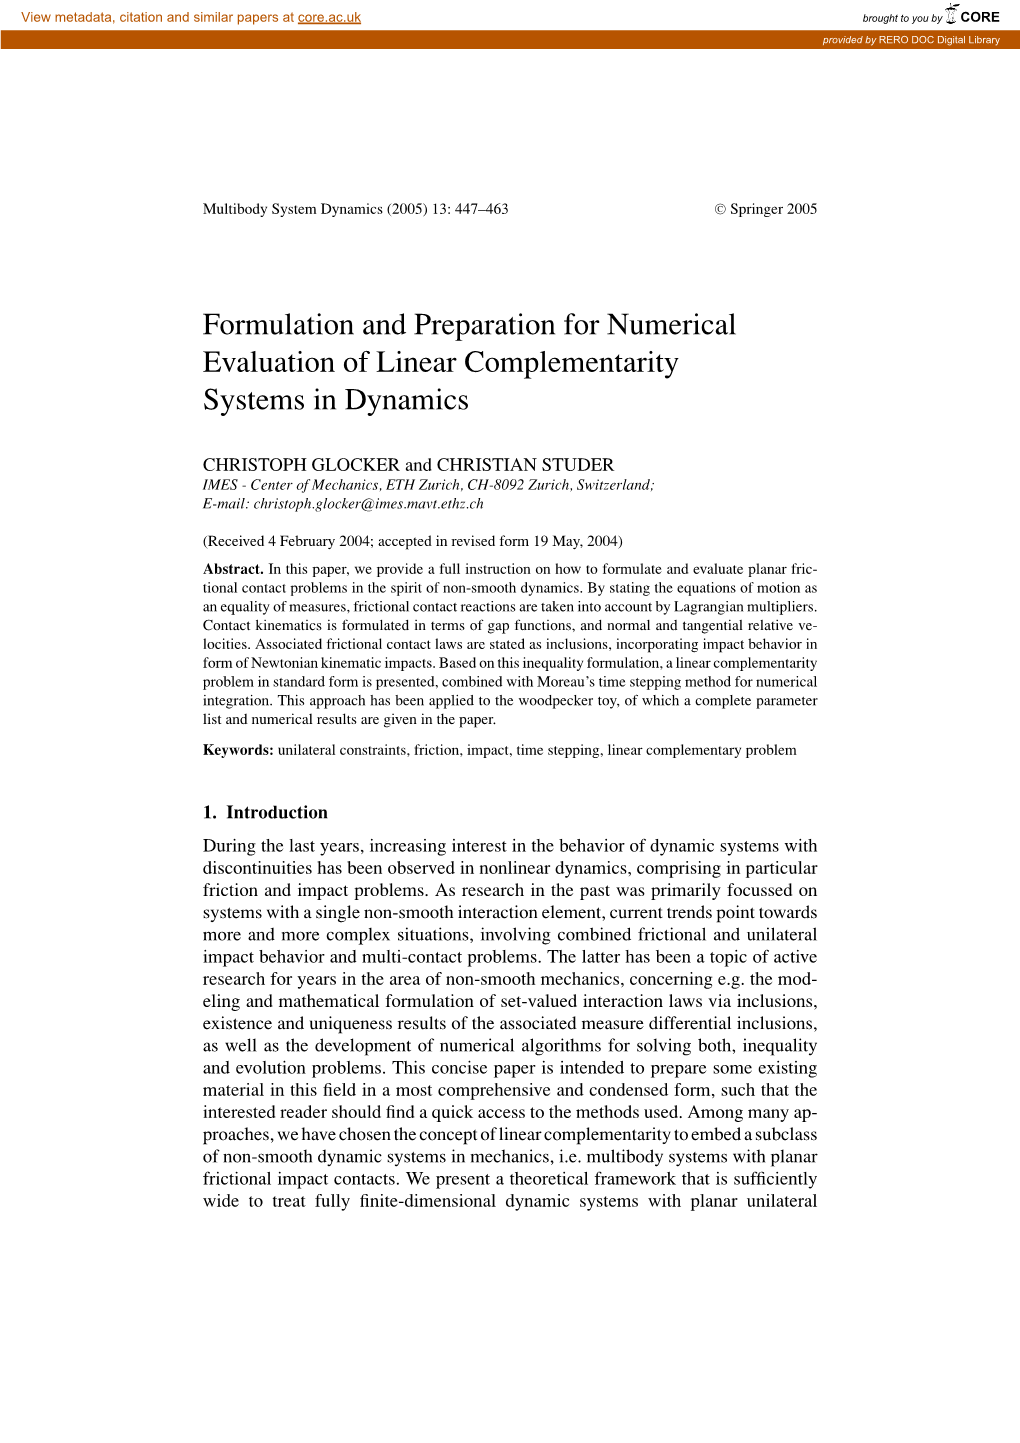 Formulation and Preparation for Numerical Evaluation of Linear Complementarity Systems in Dynamics